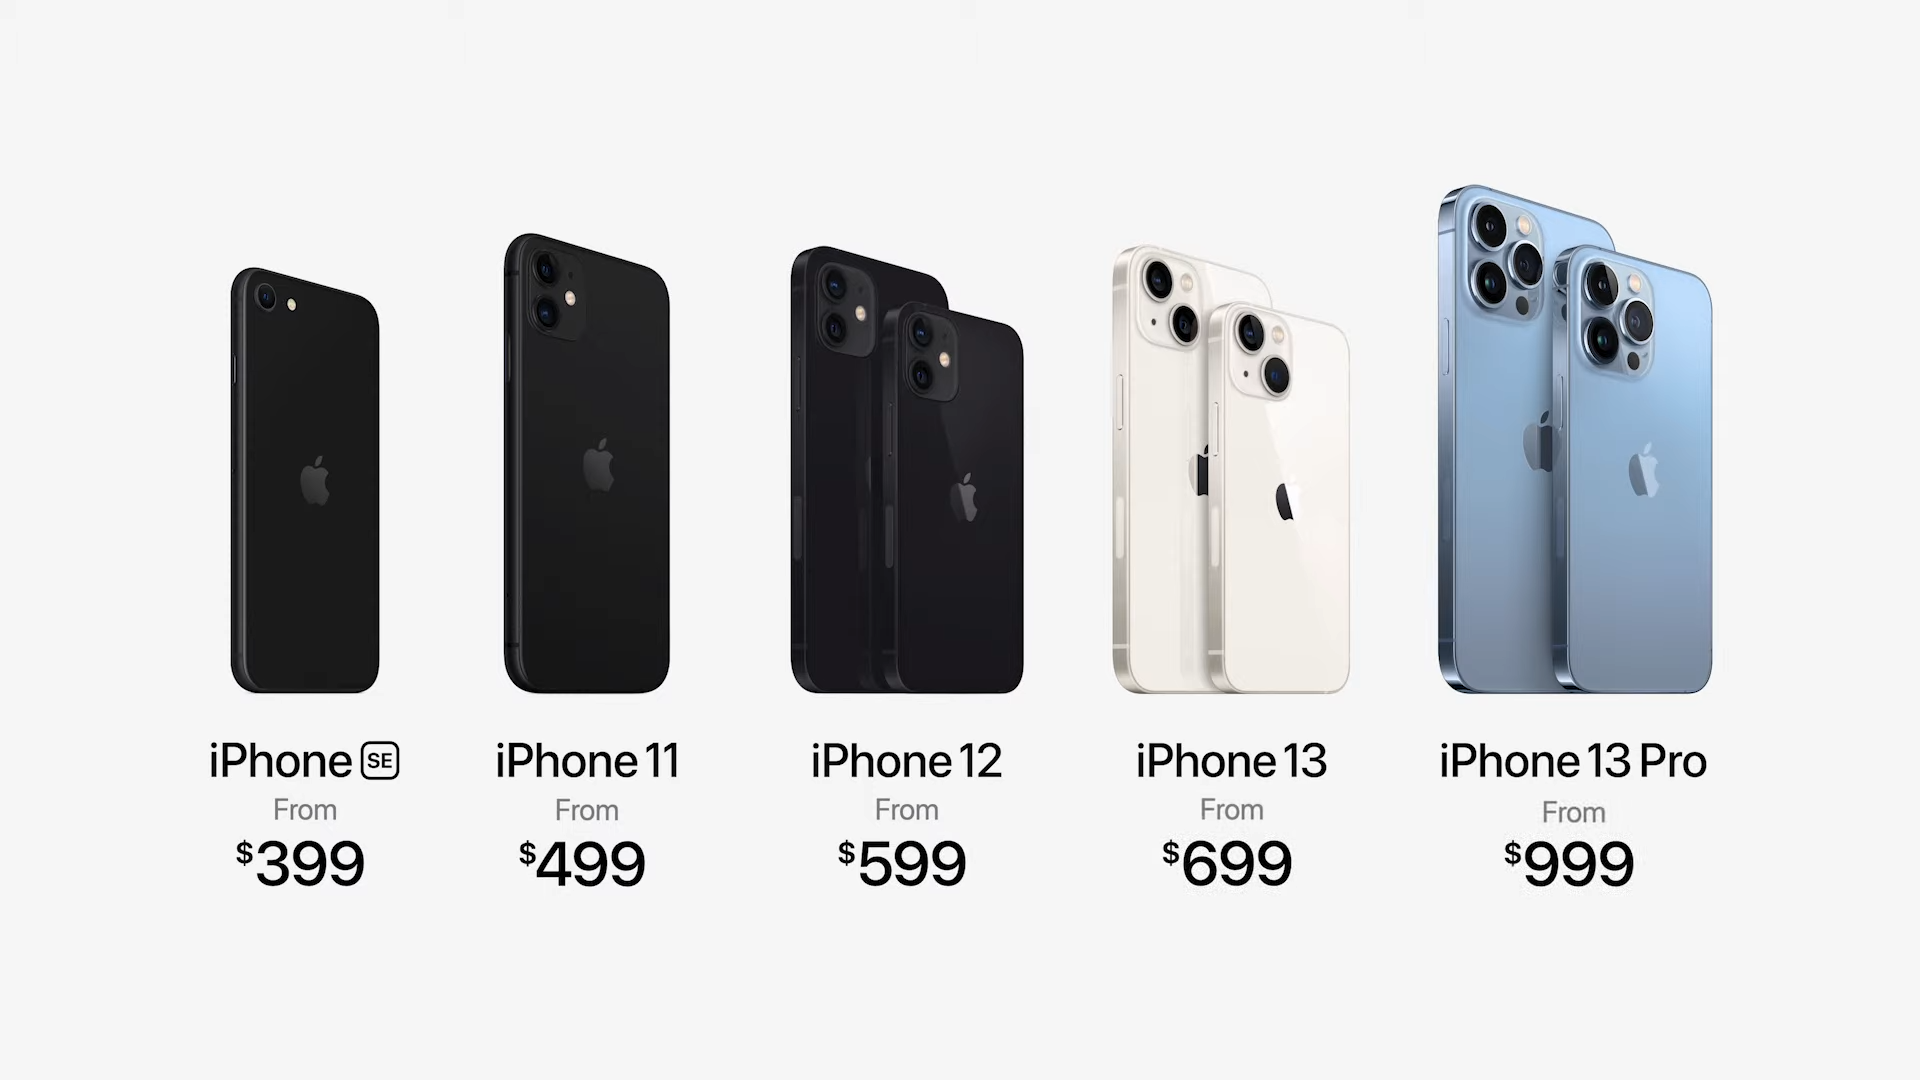 iPhone 13/Pro/Max/mini prices - Apple goes big with the iPhone 13: bigger camera, battery, storage, same price